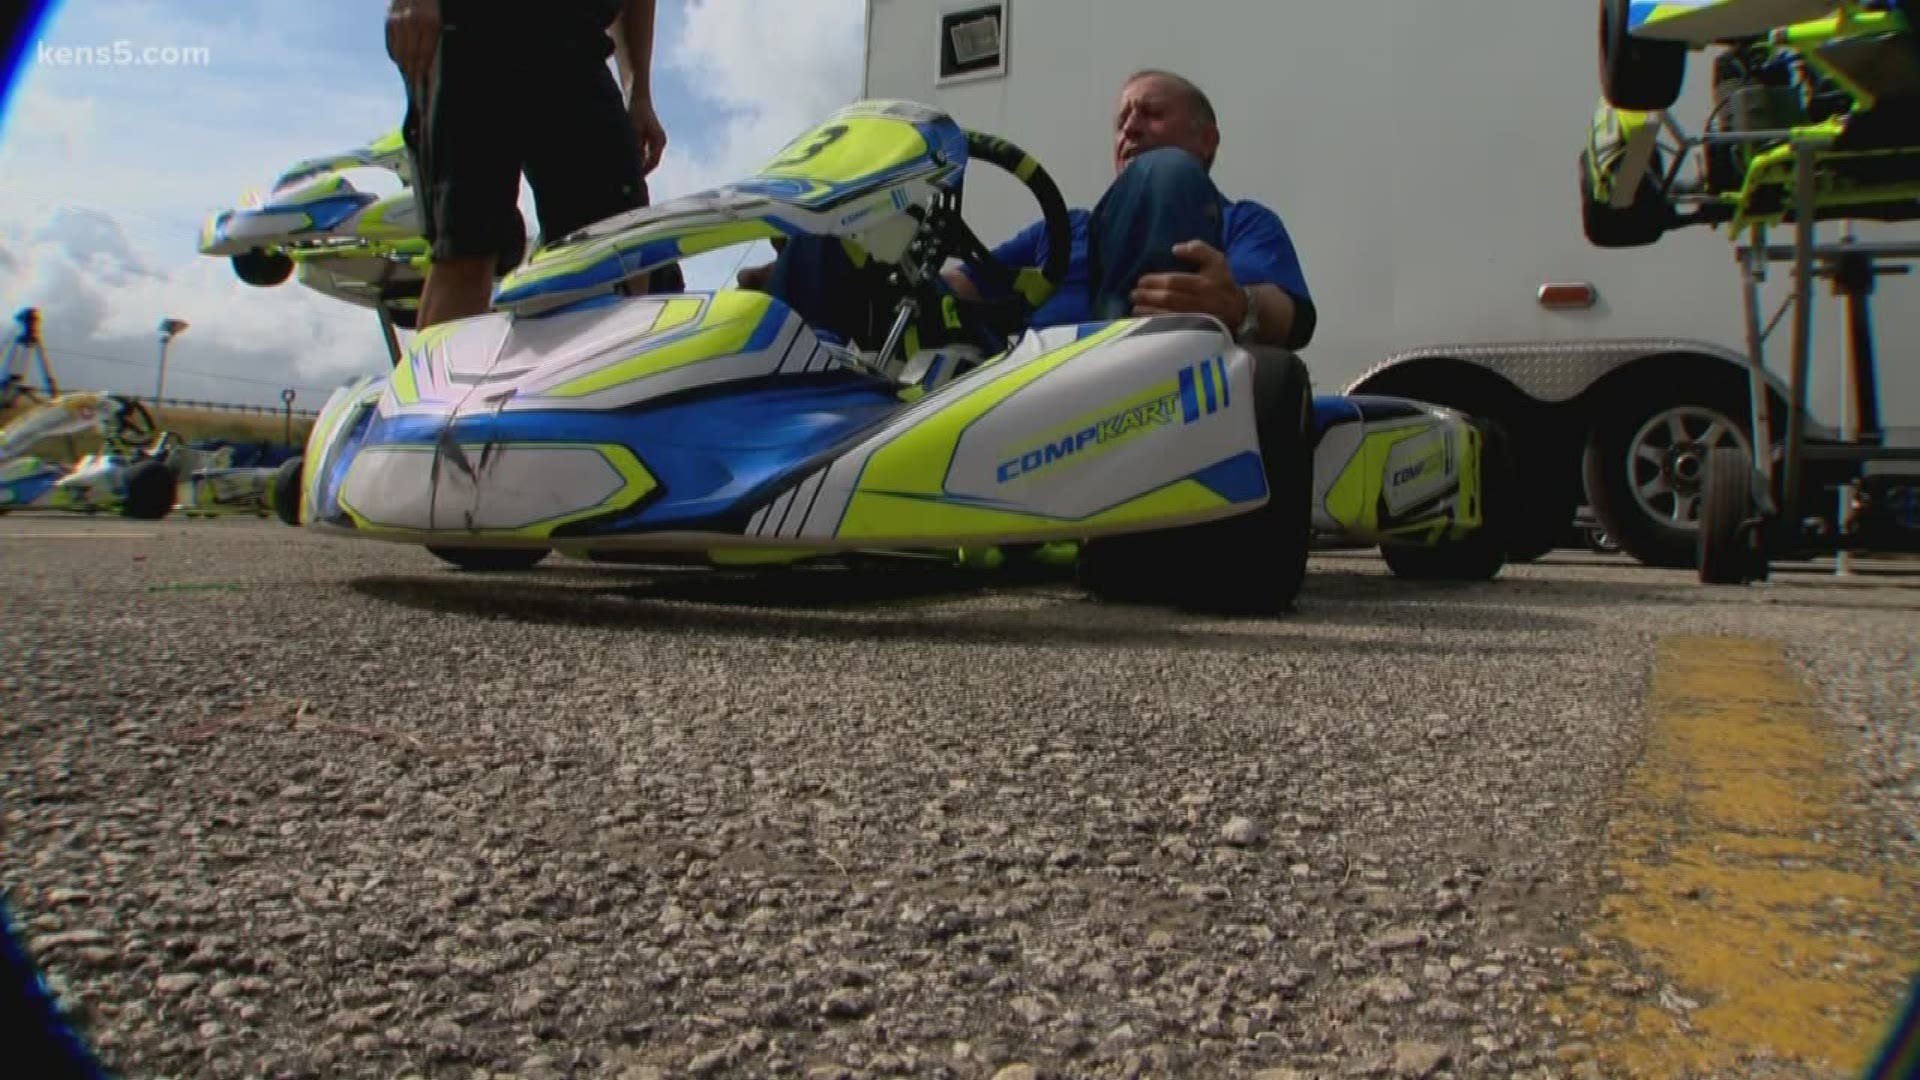 In this week's Texas Outdoors, Barry Davis is fulfilling his need for speed at the go kart race track in New Braunfels.